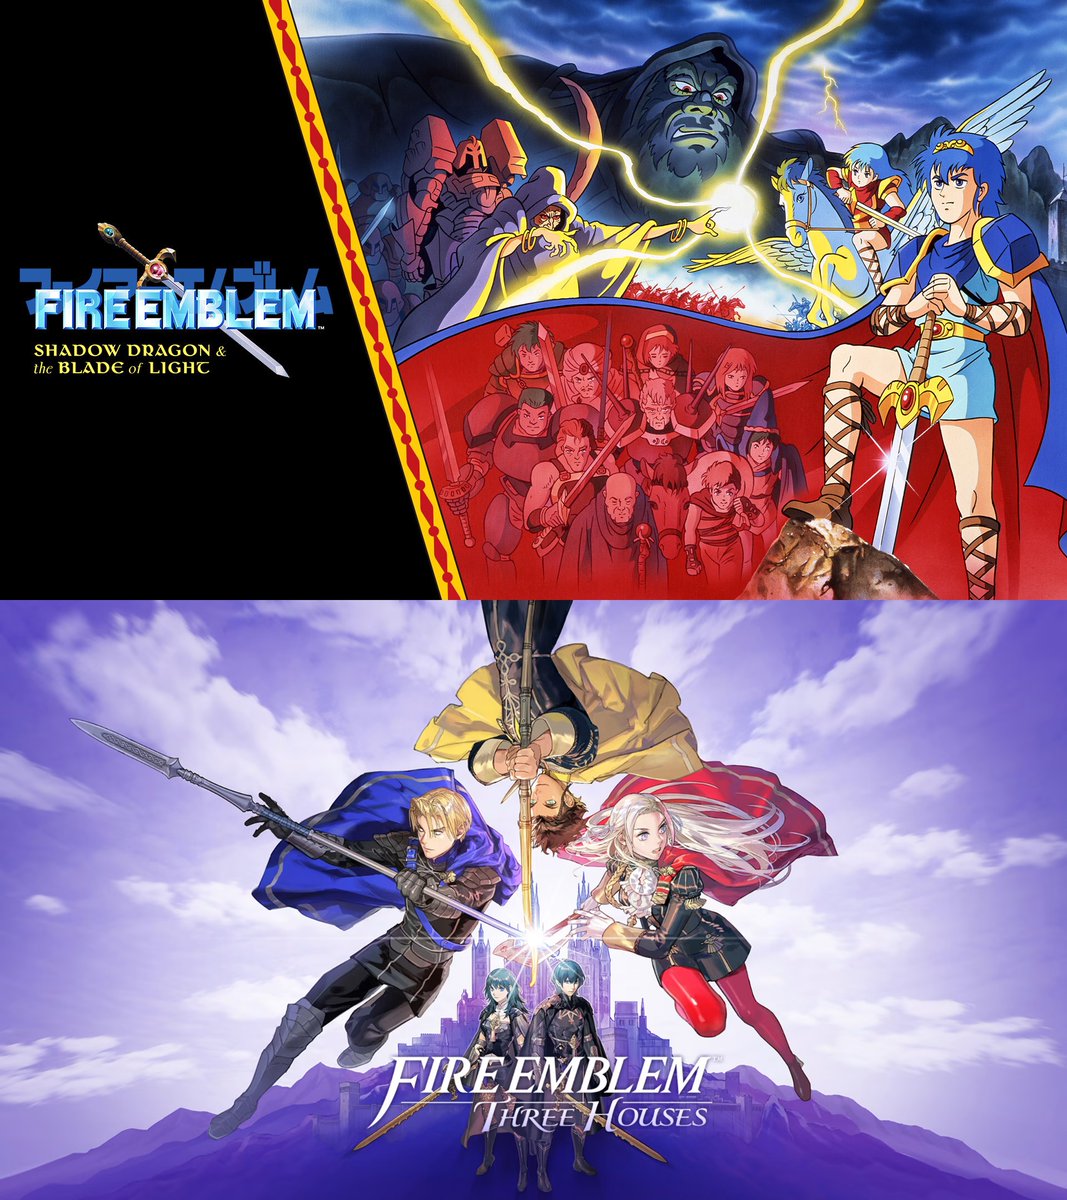 Happy 34th anniversary to the Fire Emblem series! Fire Emblem is widely recognized as the first SRPG and decades later, it's currently more popular than ever. Fire Emblem Three Houses is the best selling SRPG of all time.